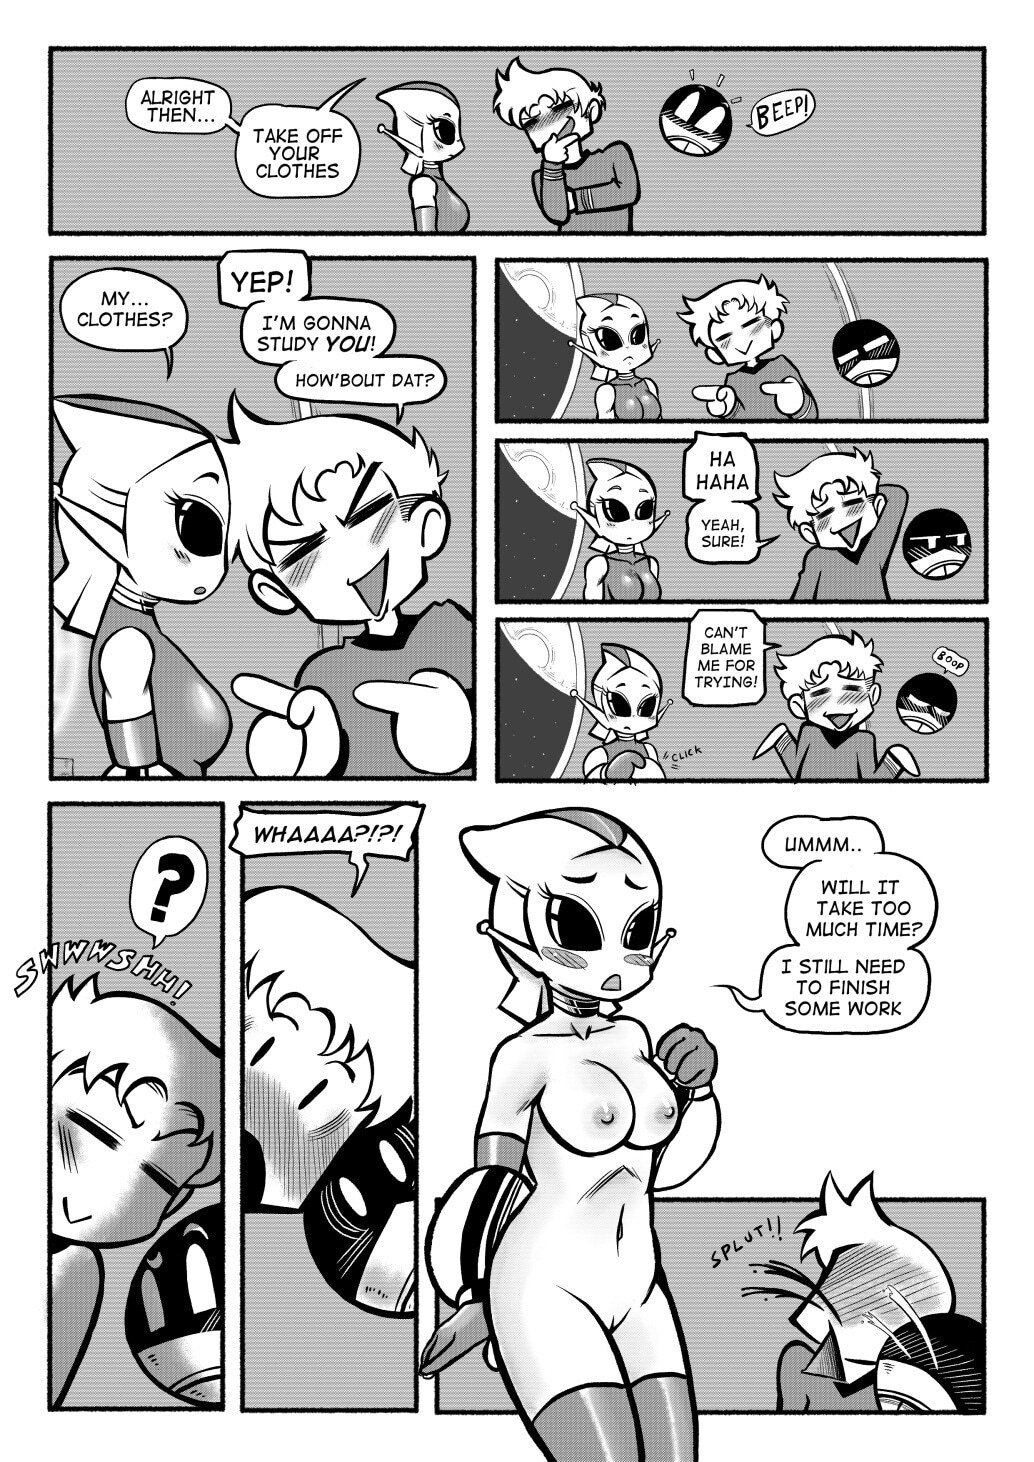 Abducted! - Mr.E - Page 12